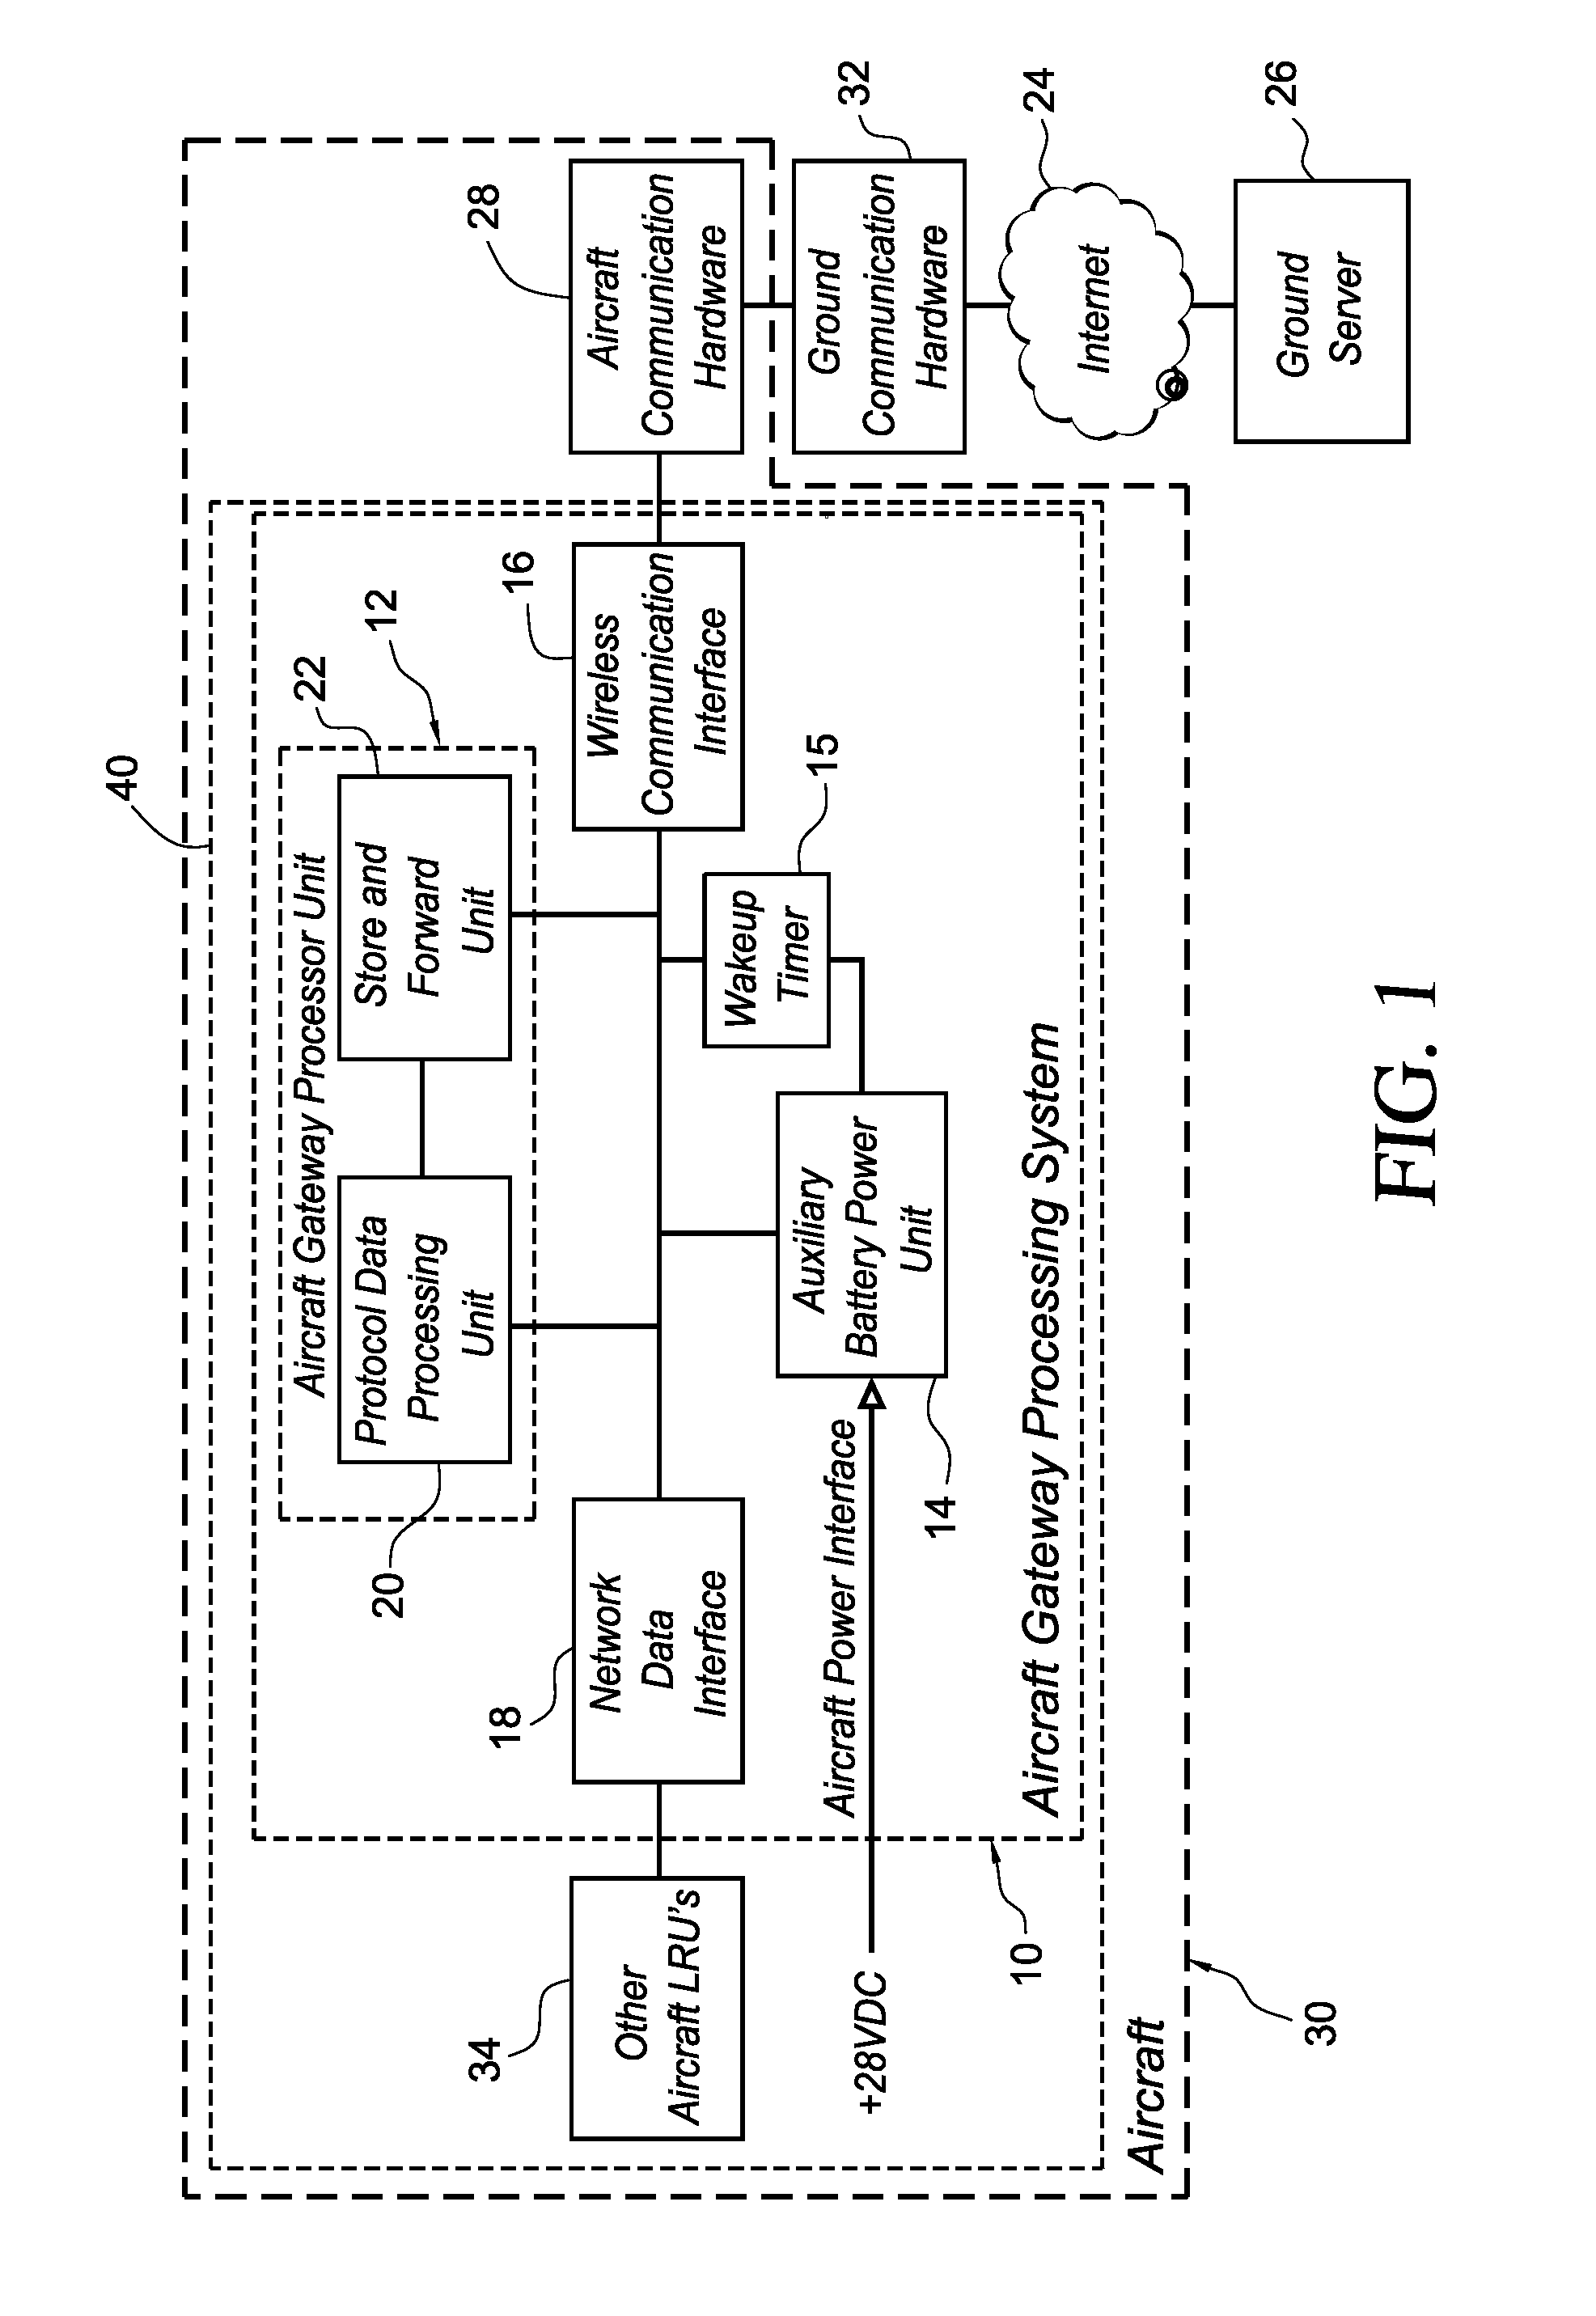 Wireless aircraft gateway with auxiliary battery power